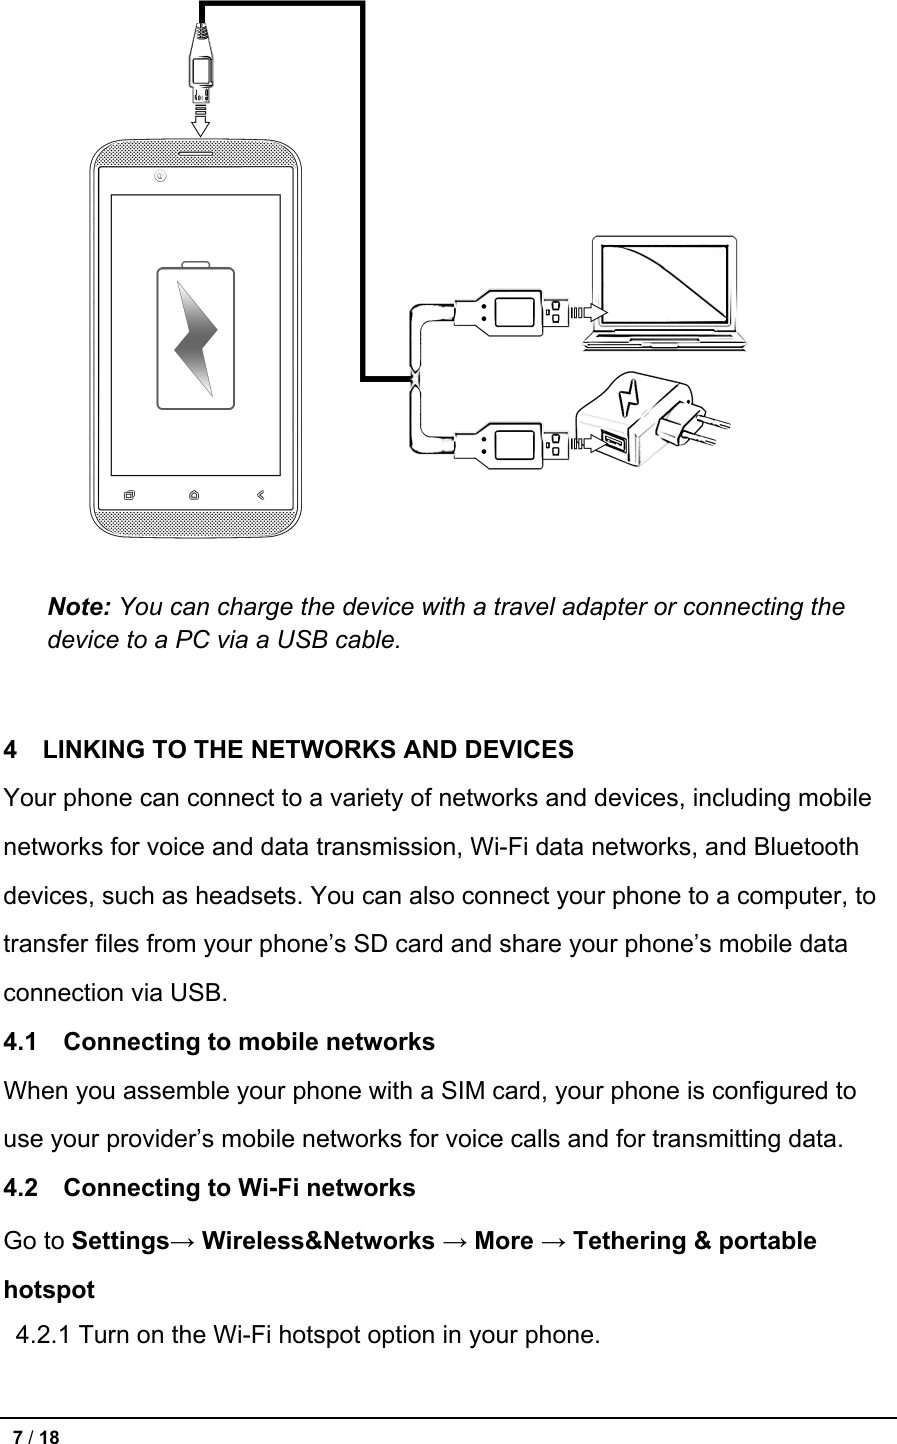   Note: You can charge the device with a travel adapter or connecting the device to a PC via a USB cable.   4   LINKING TO THE NETWORKS AND DEVICES Your phone can connect to a variety of networks and devices, including mobile networks for voice and data transmission, Wi-Fi data networks, and Bluetooth devices, such as headsets. You can also connect your phone to a computer, to transfer files from your phone’s SD card and share your phone’s mobile data connection via USB. 4.1  Connecting to mobile networks When you assemble your phone with a SIM card, your phone is configured to use your provider’s mobile networks for voice calls and for transmitting data. 4.2  Connecting to Wi-Fi networks Go to Settings→ Wireless&amp;Networks → More → Tethering &amp; portable hotspot  4.2.1 Turn on the Wi-Fi hotspot option in your phone.  7 / 18   